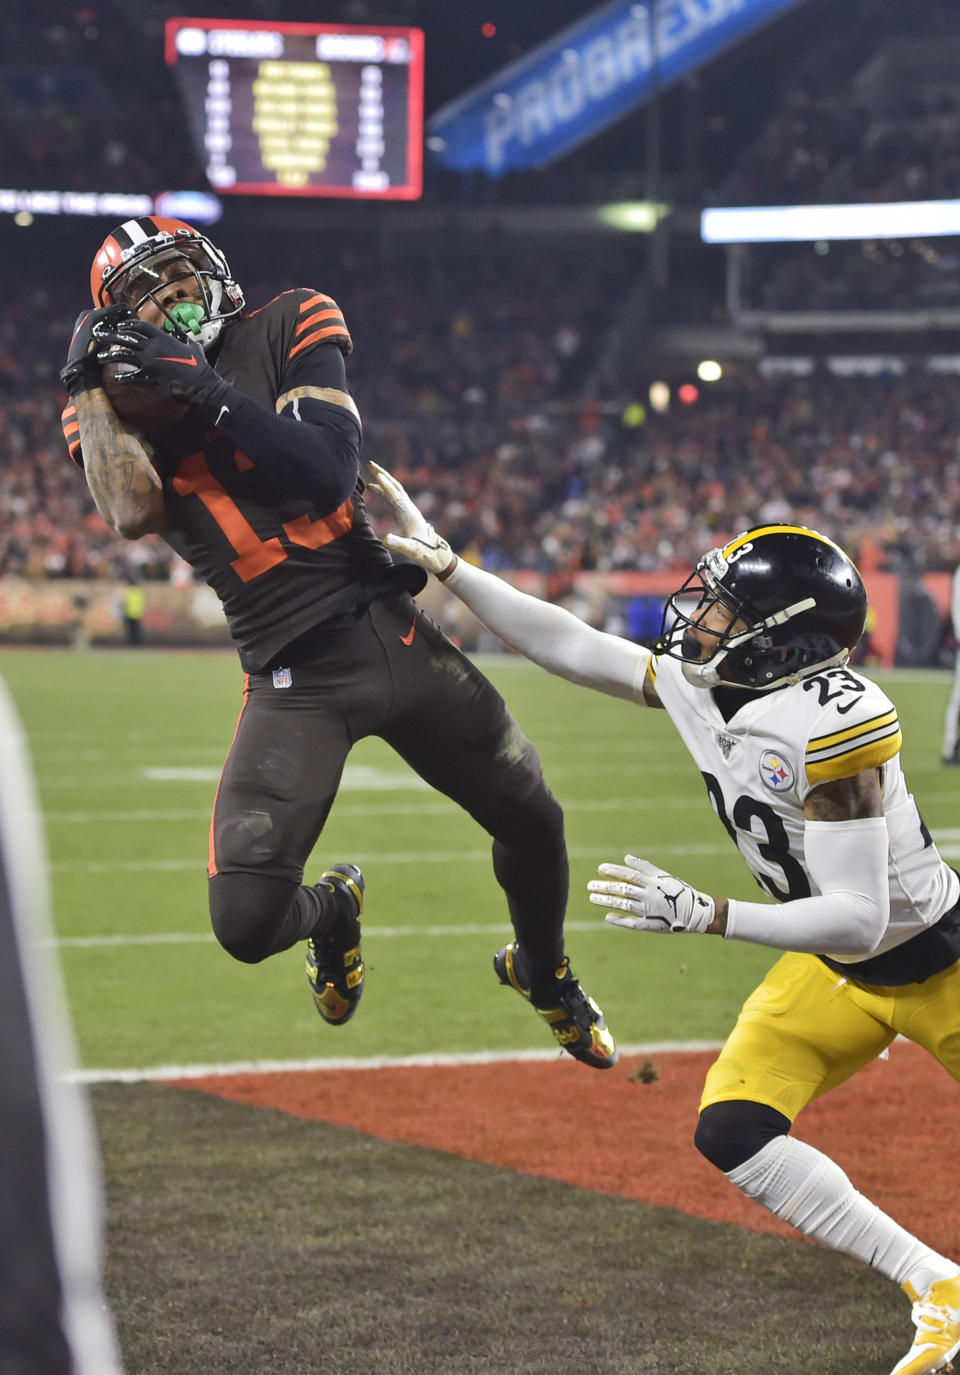 Cleveland Browns wide receiver Odell Beckham Jr., left, can't hold on to the ball under pressure from Pittsburgh Steelers cornerback Joe Haden during the second half of an NFL football game Thursday, Nov. 14, 2019, in Cleveland. (AP Photo/David Richard)